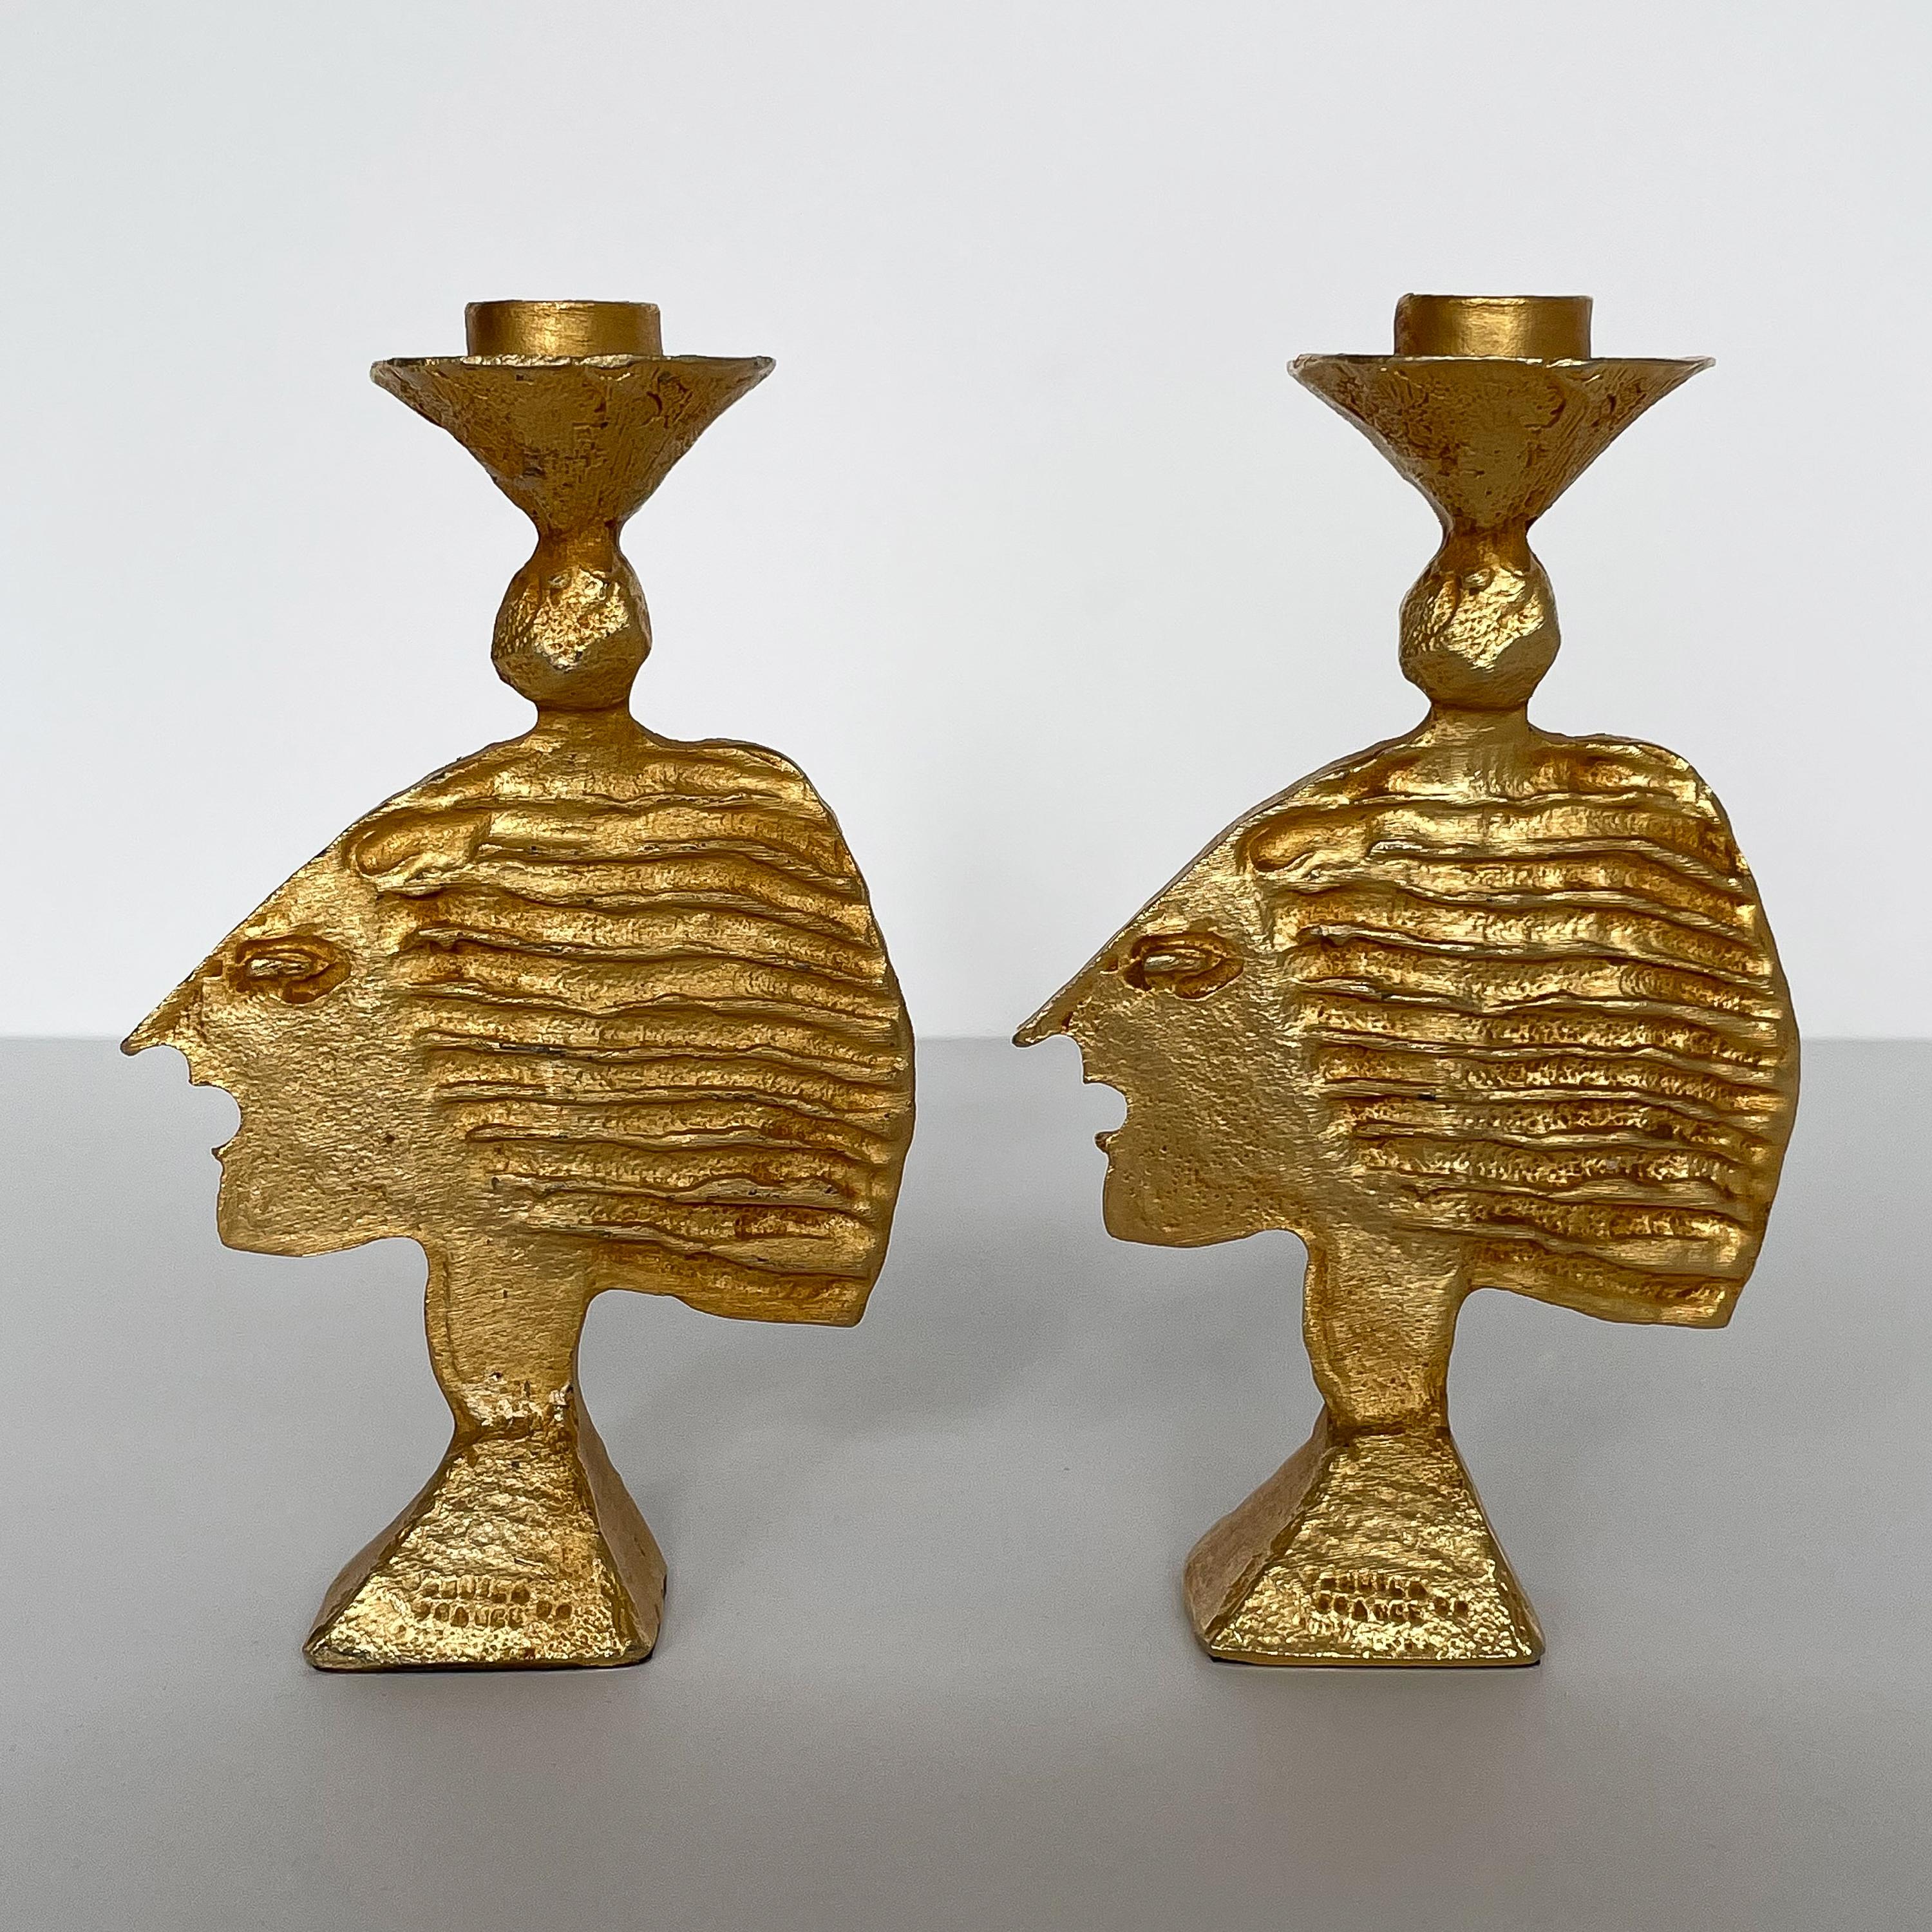 Pair of French Gilt Metal Candlesticks by Pierre Casenove for Fondica 1